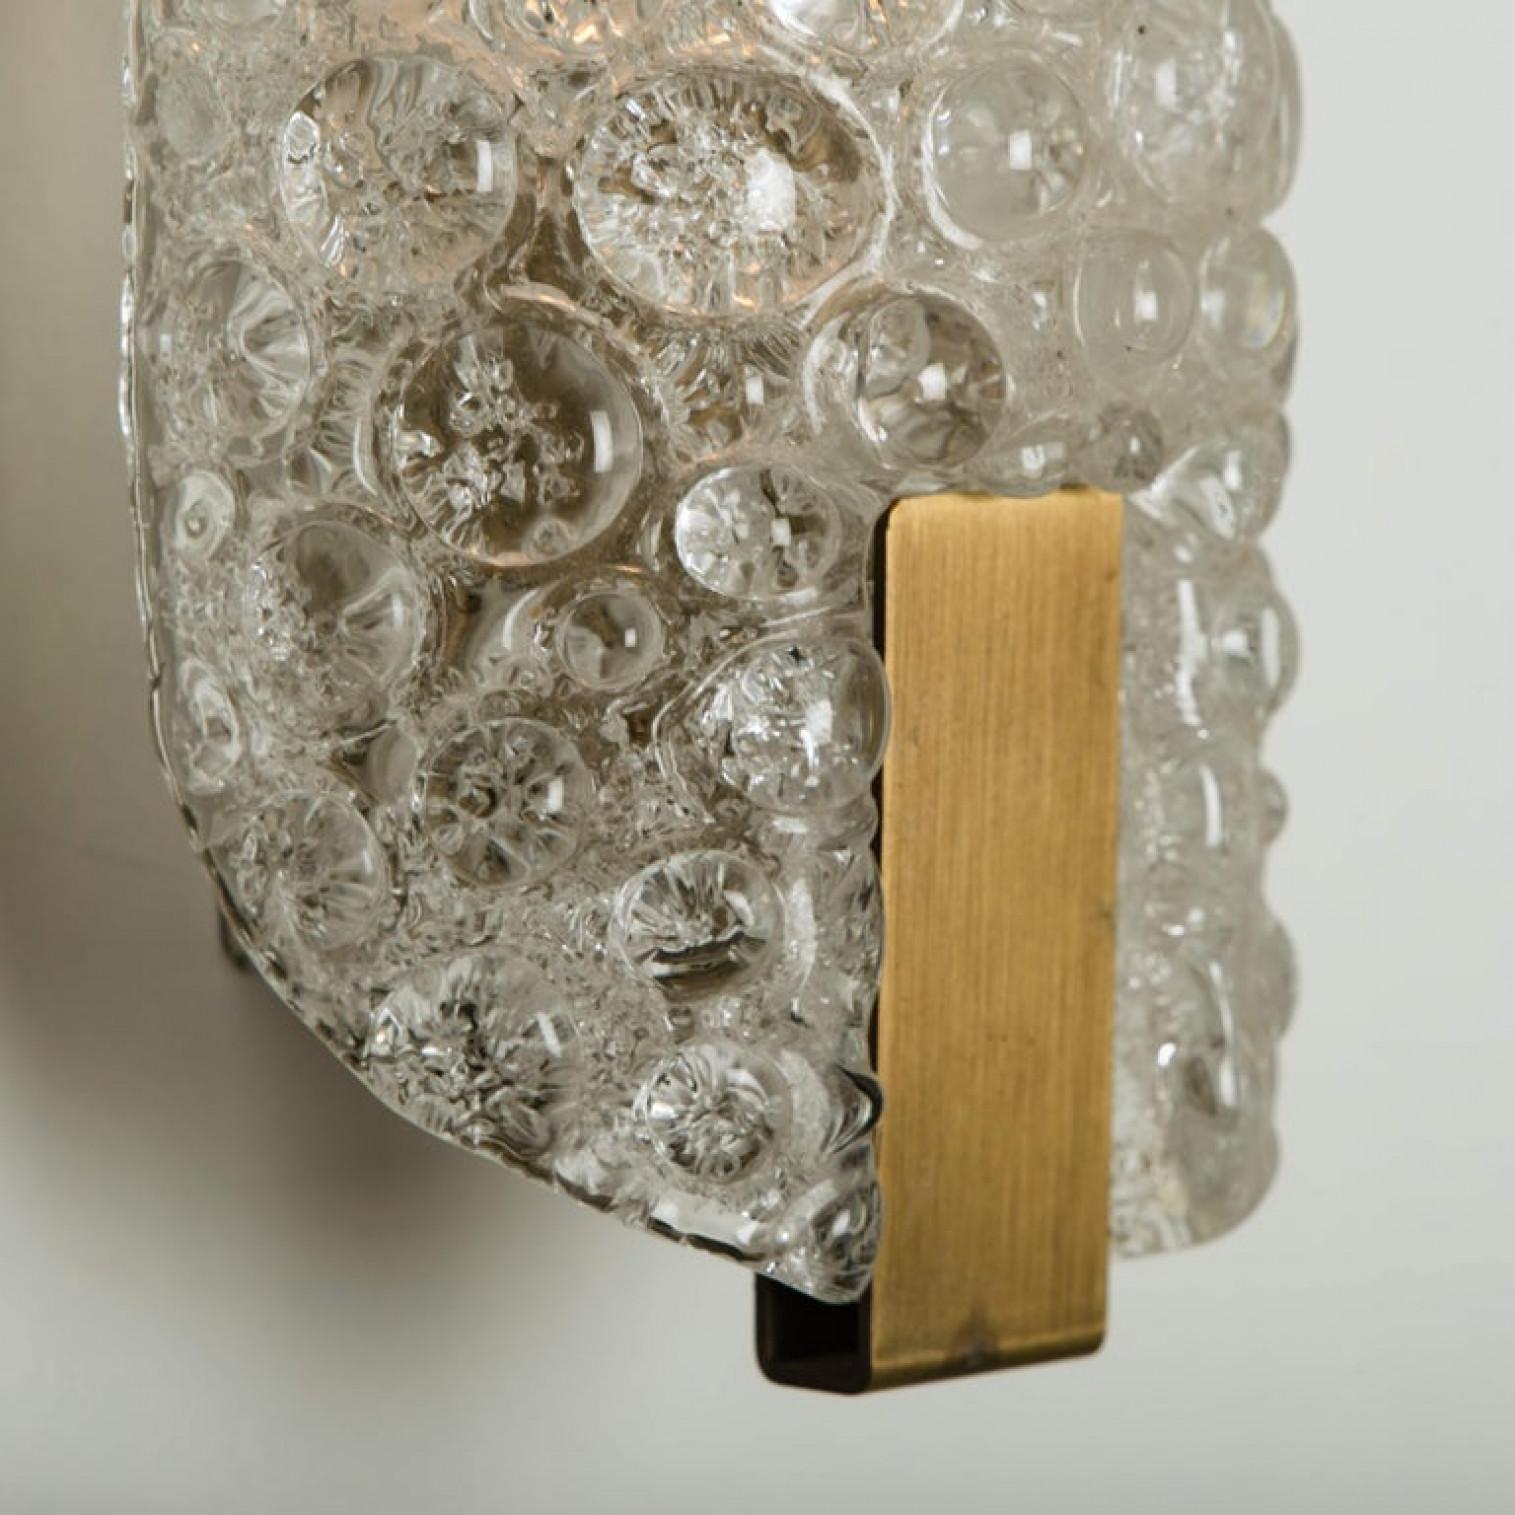 Mid-Century Modern 1 of the 4 Hillebrand Massive Murano Wall Light Fixtures, 1960 For Sale